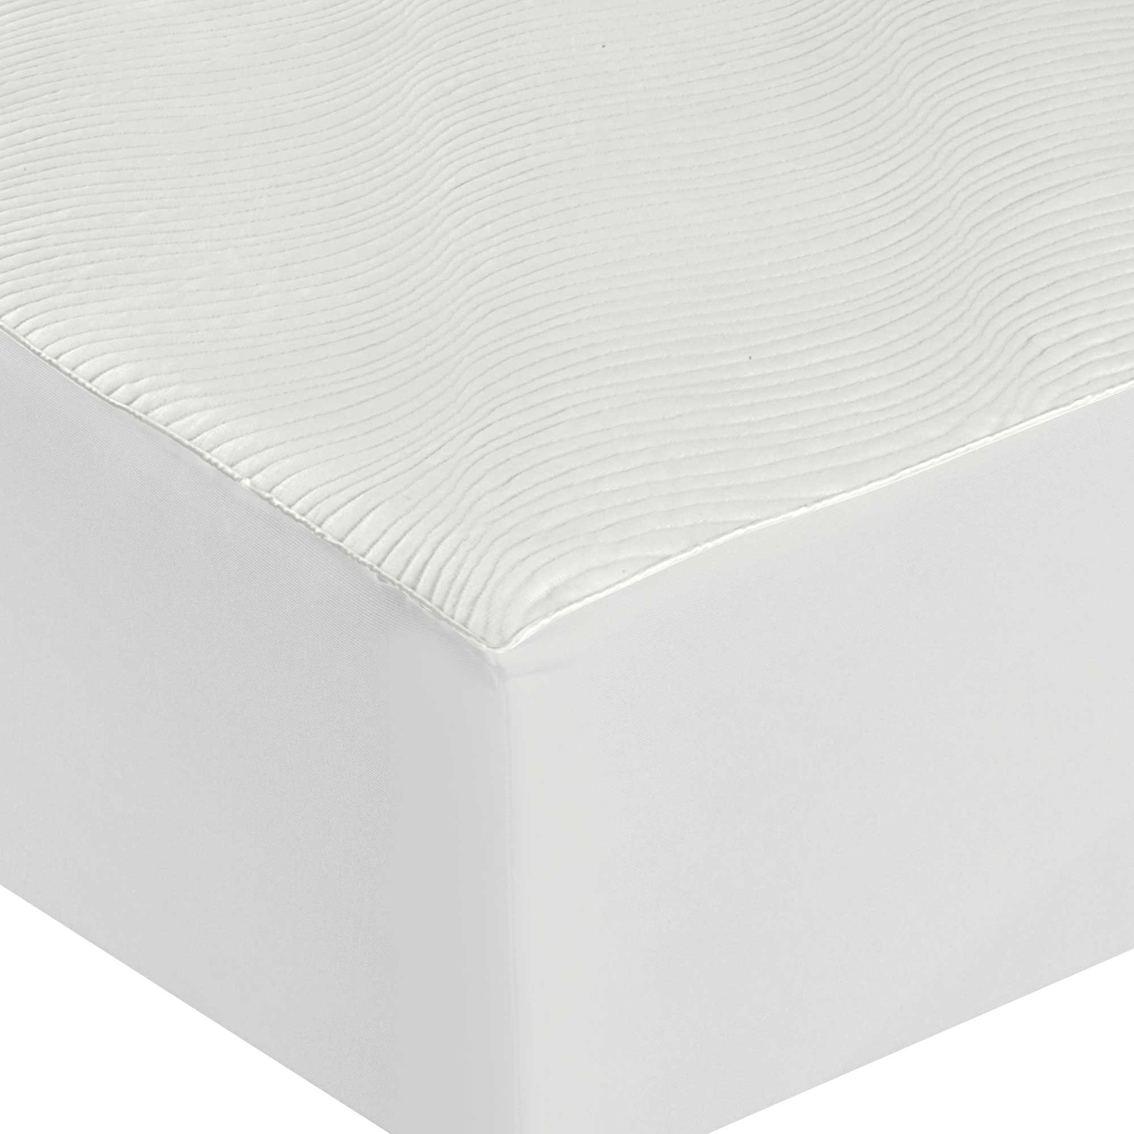 Sealy Luxury Knit Mattress Protector - Image 3 of 6